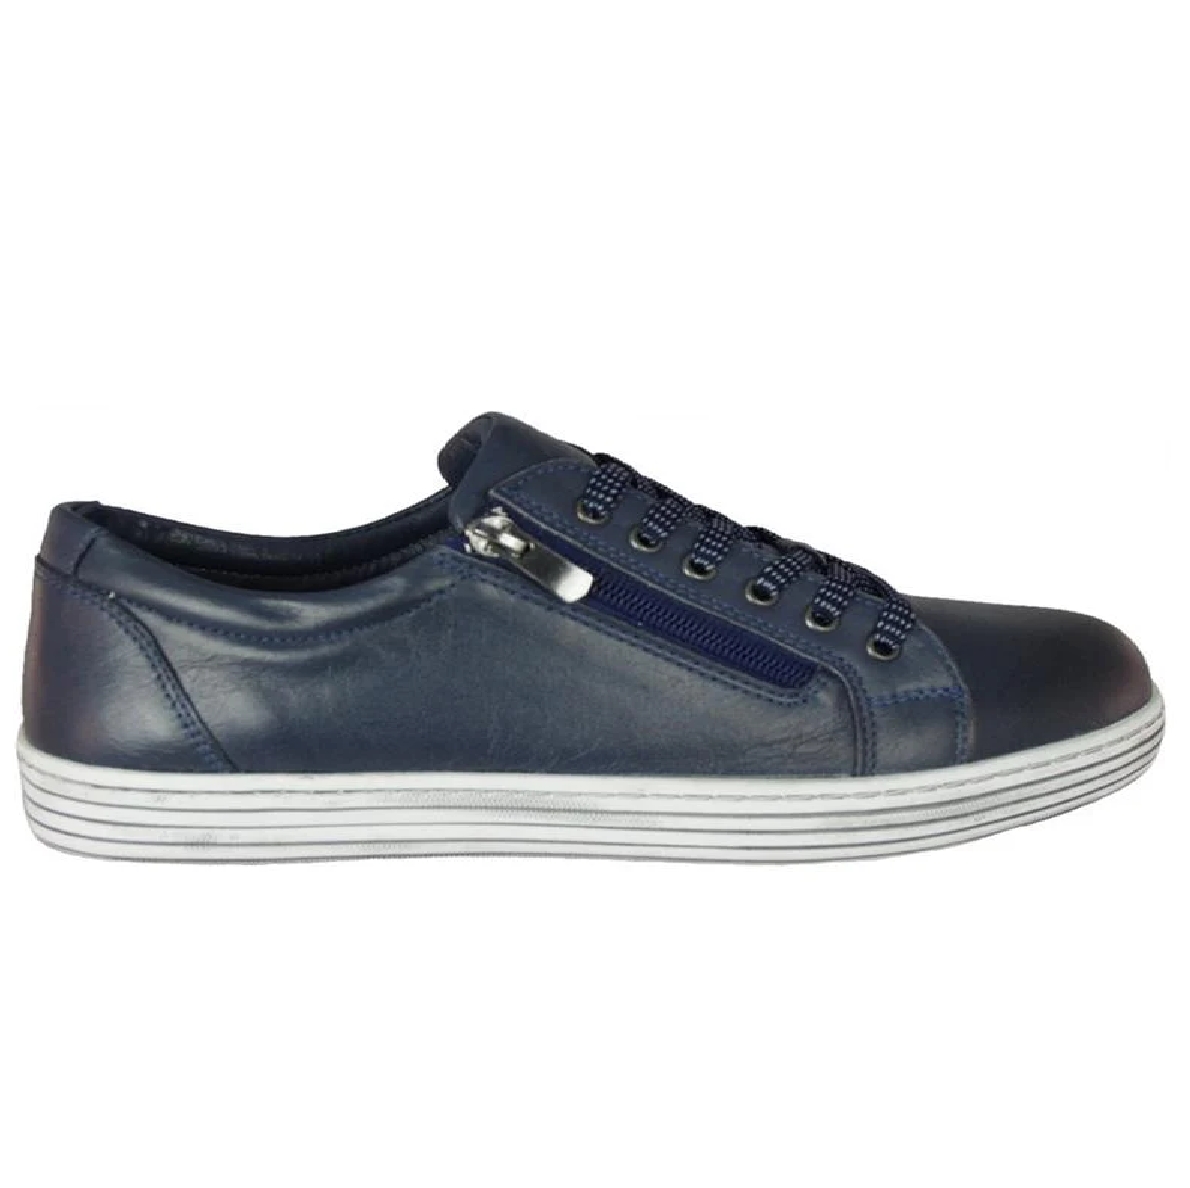 Cabello Unity Womens Casual Shoes: Navy | Mike Pawley Sports